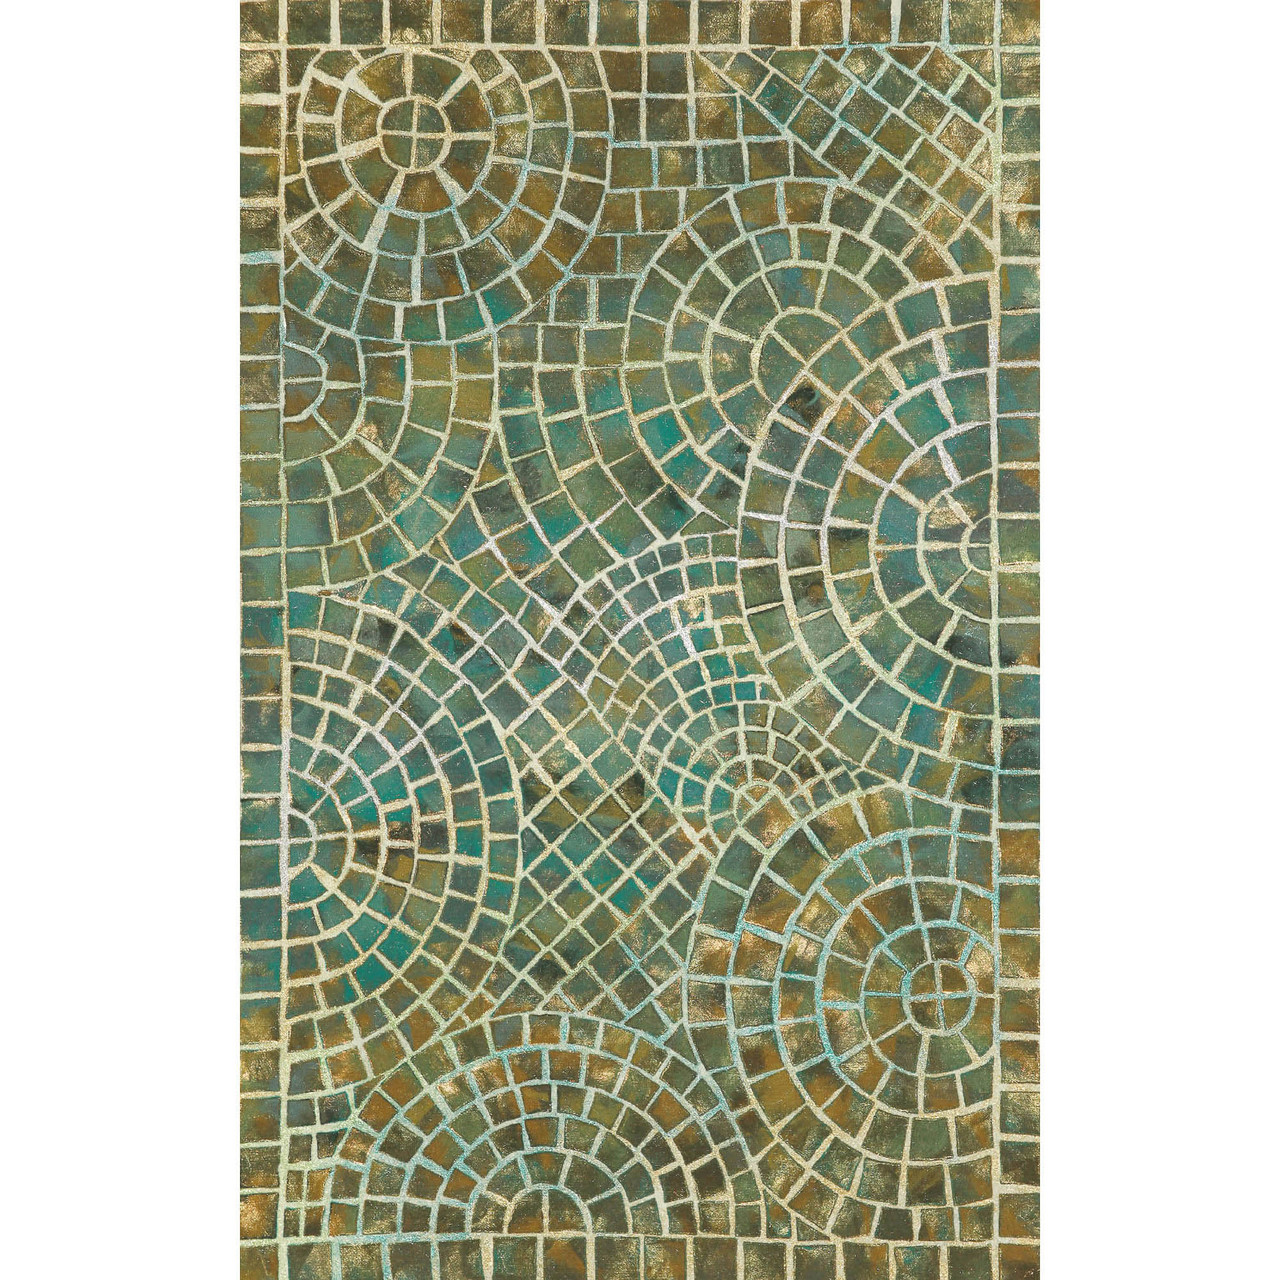 Visions V Arch Tile Indoor/Outdoor Rug - Lapis - 6 Sizes